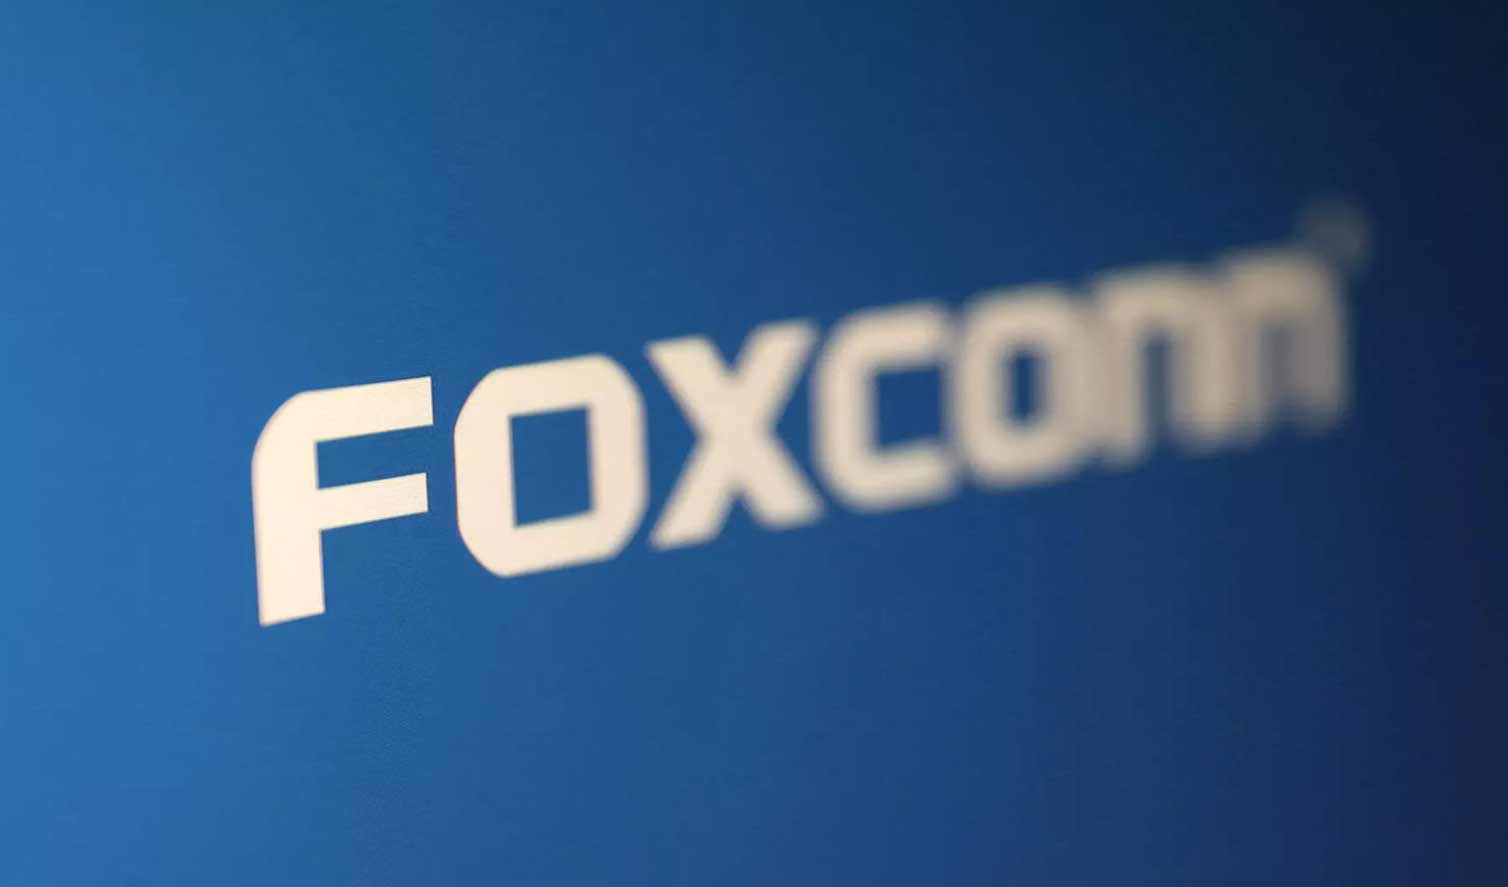 iPhone Maker Foxconn Infuses INR 461 Cr In Bengaluru Unit